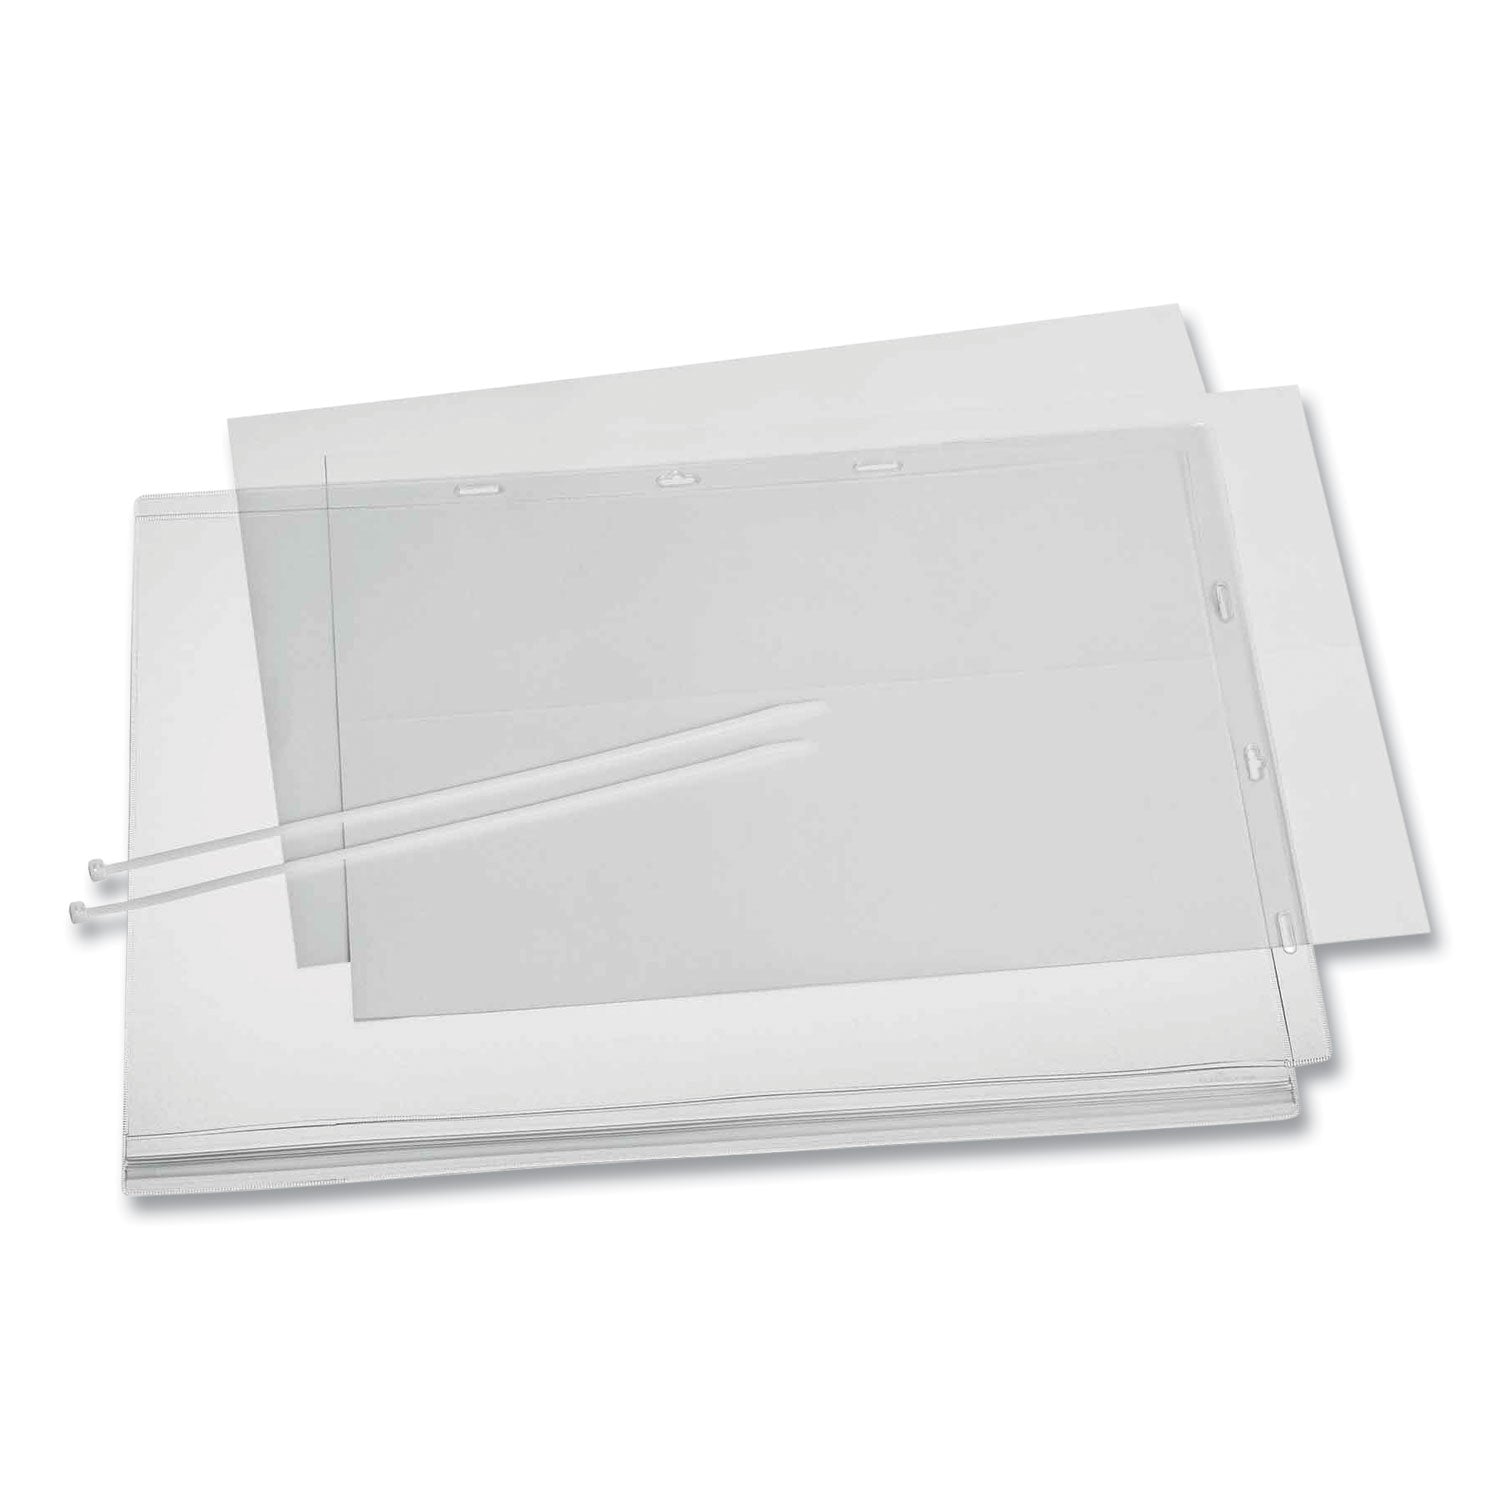 water-resistant-sign-holder-pockets-with-cable-ties-11-x-17-clear-frame-5-pack_dbl502819 - 2